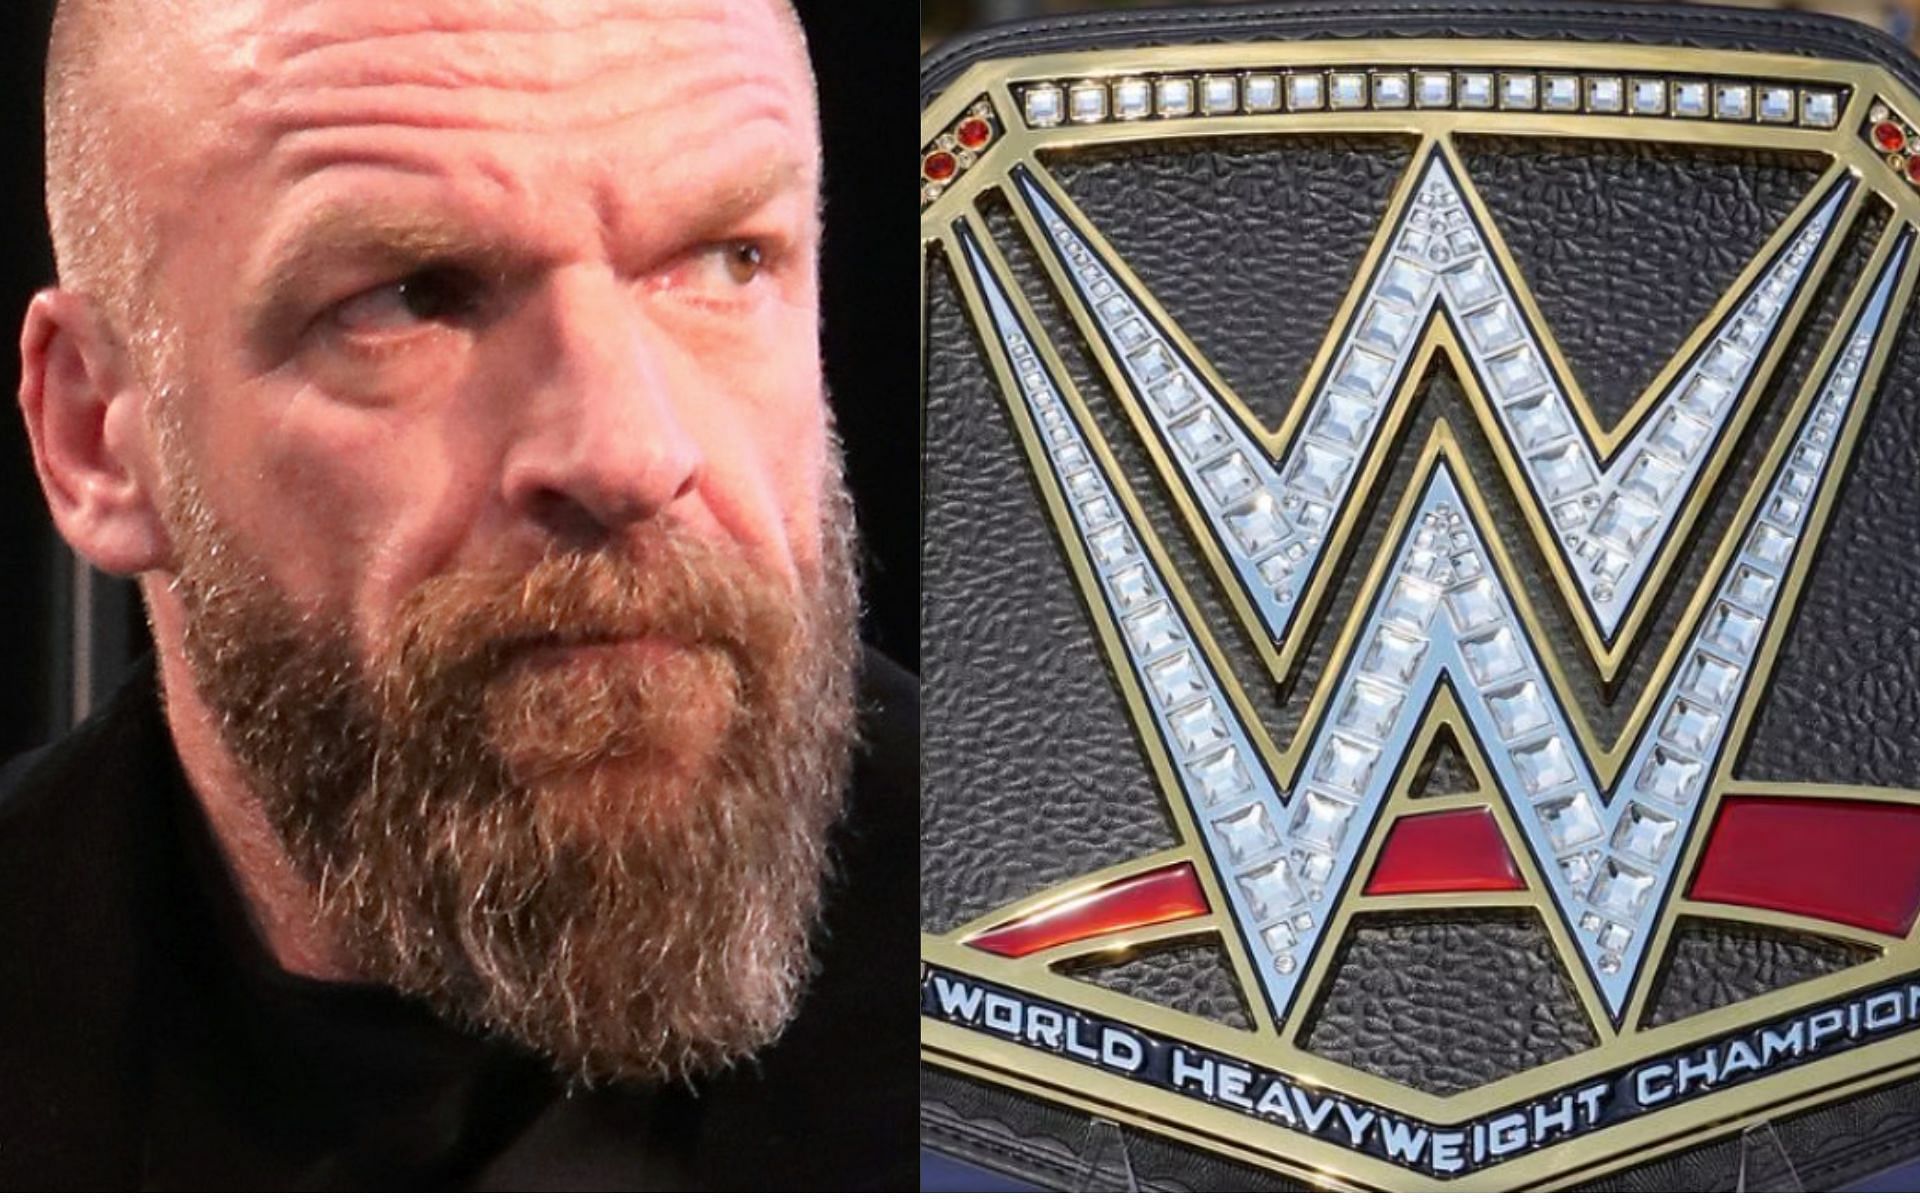 Triple H is a 14-time WWE World Champion